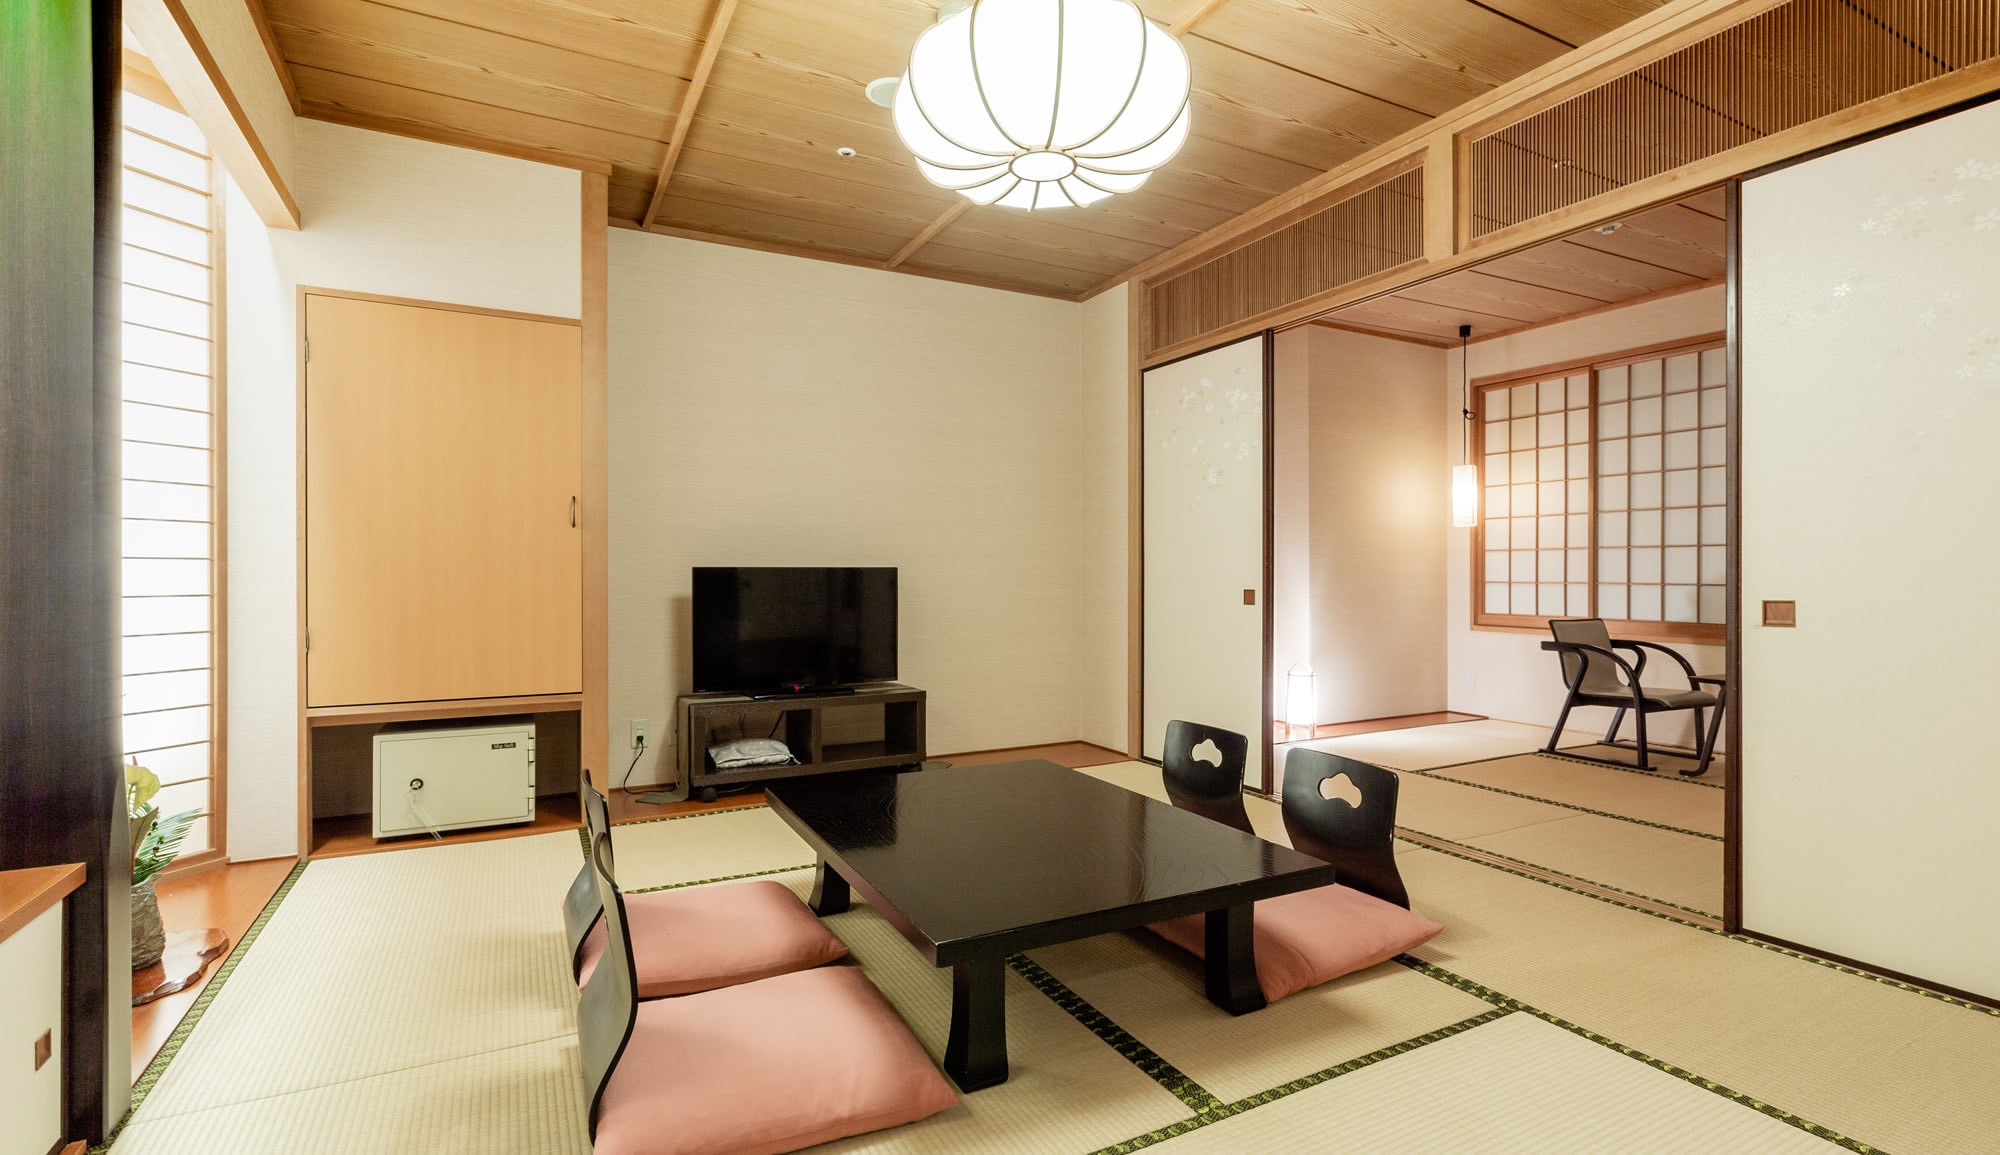 ◇ [East Building ◇ Special Japanese-style room] Room with hot springs that can be used at the source "Kaze"